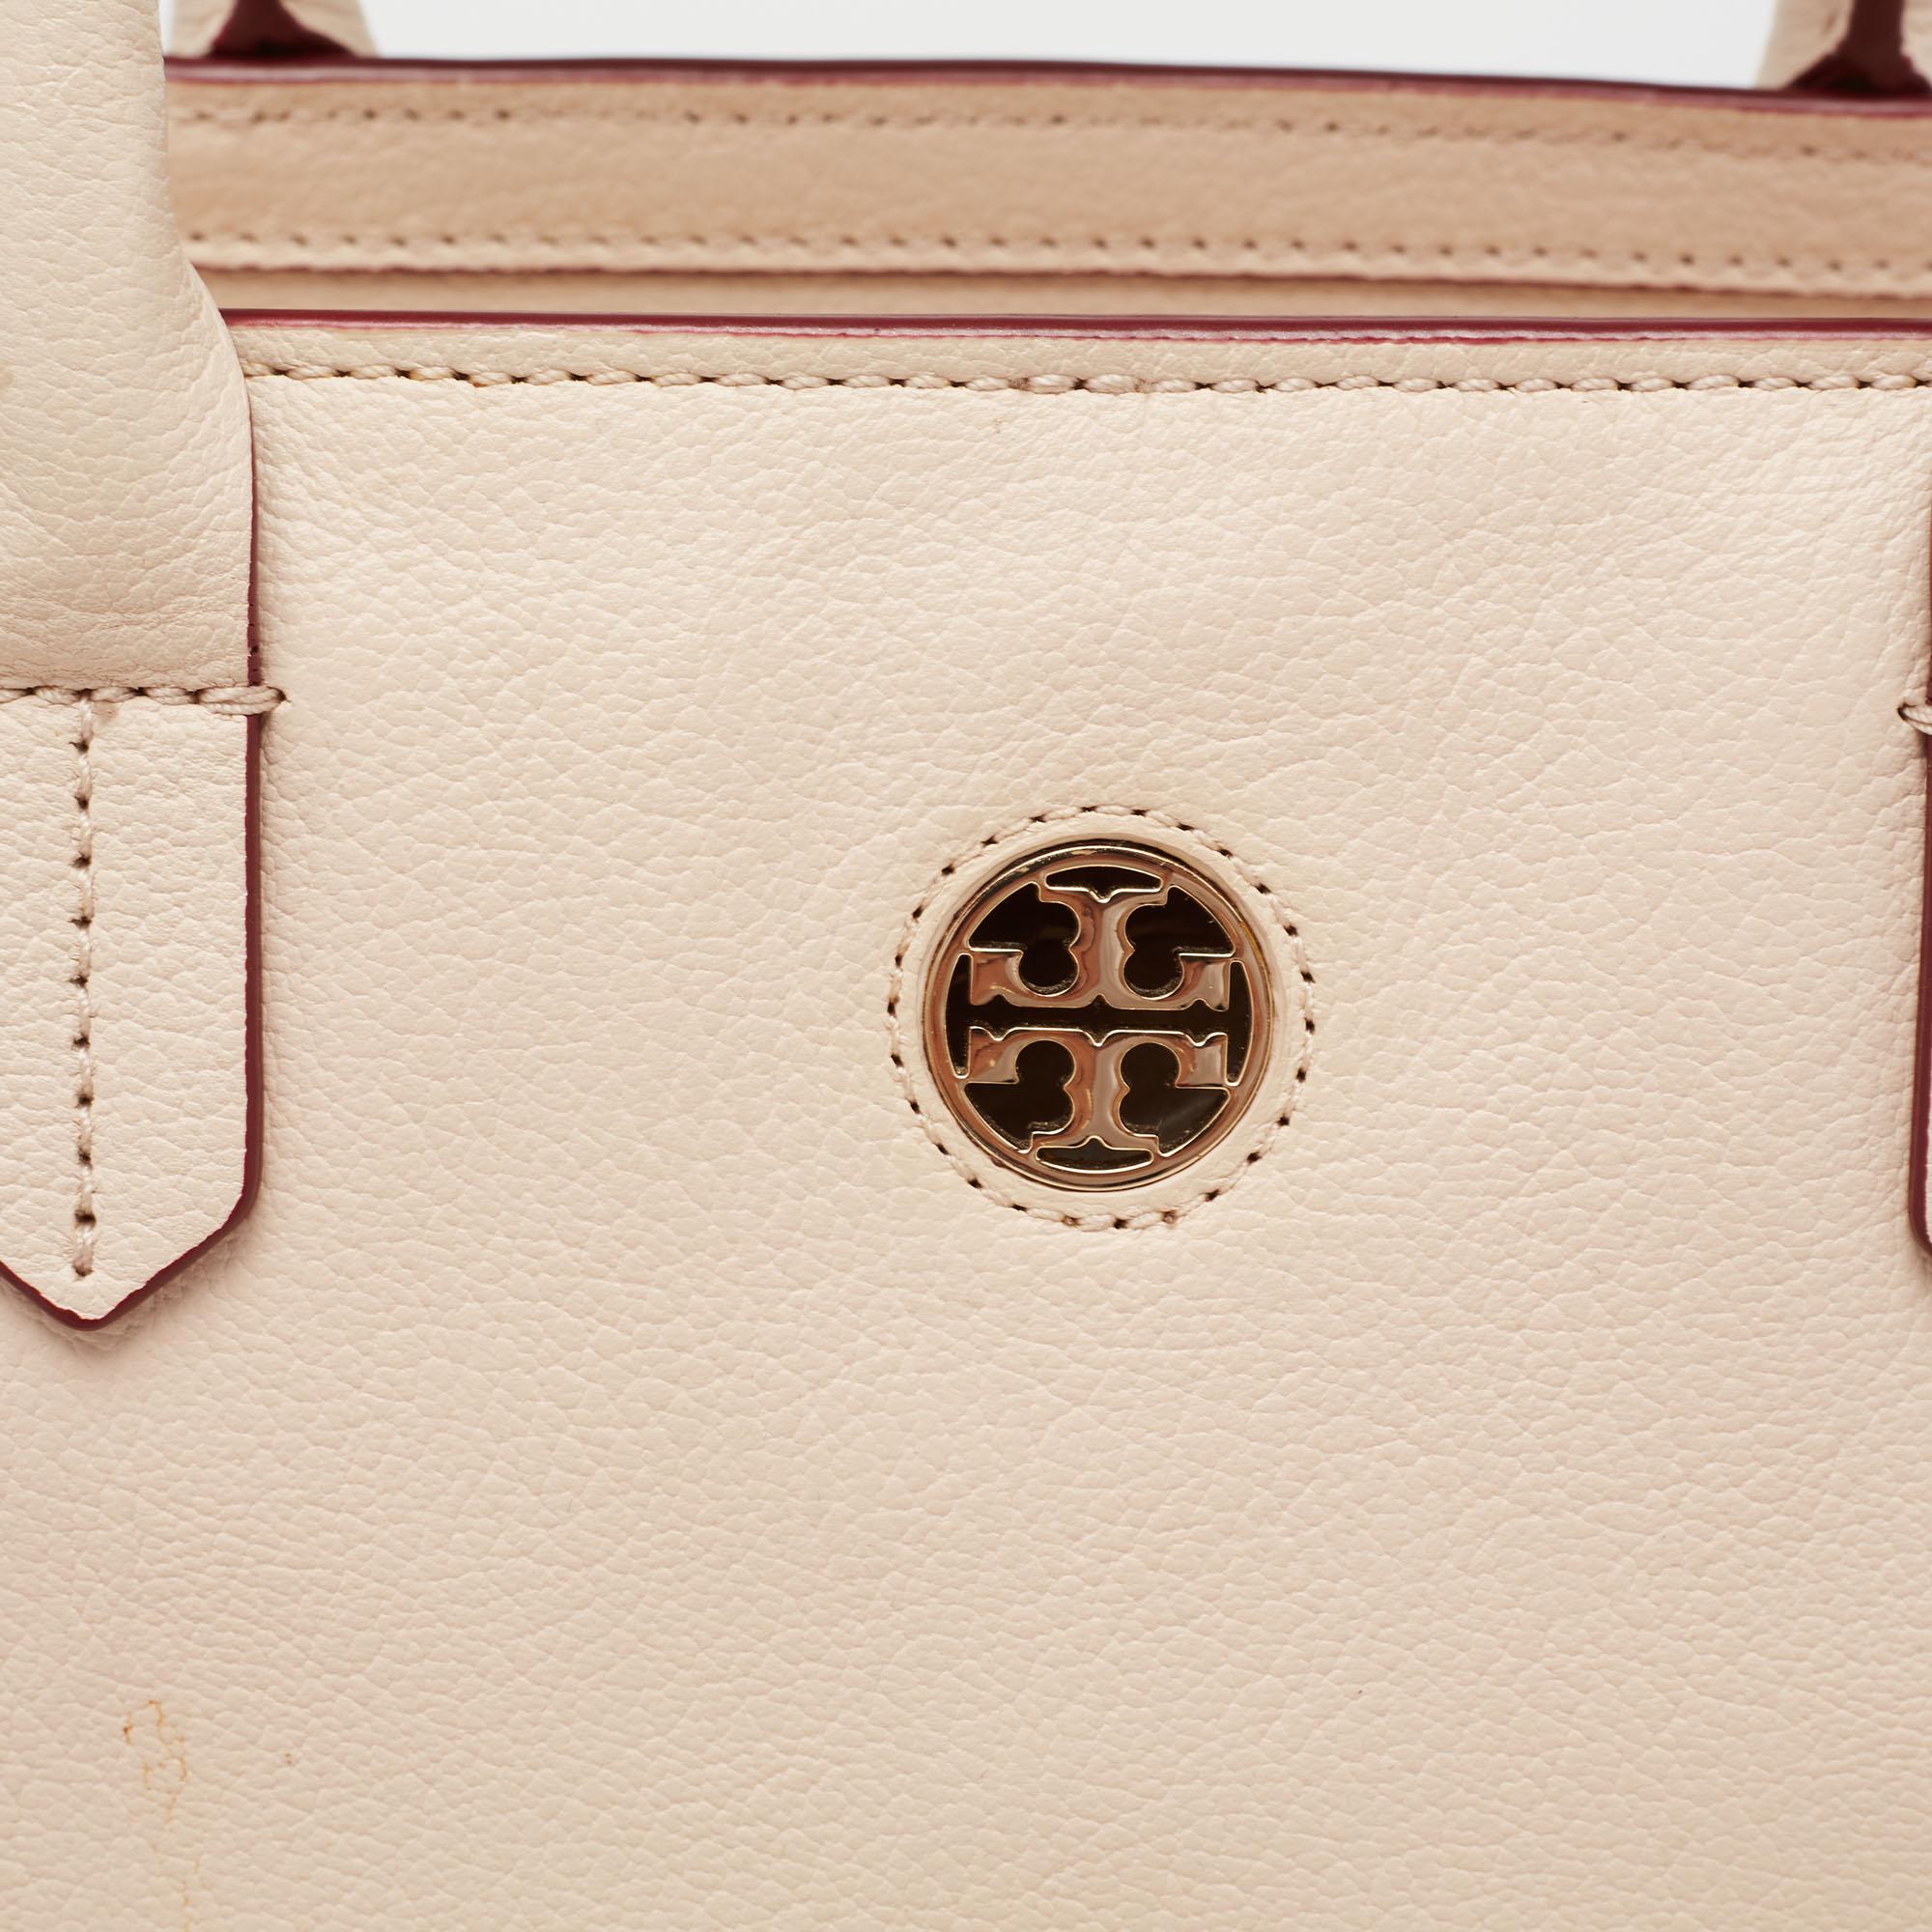 Tory Burch Beige Leather Robinson Tote 2